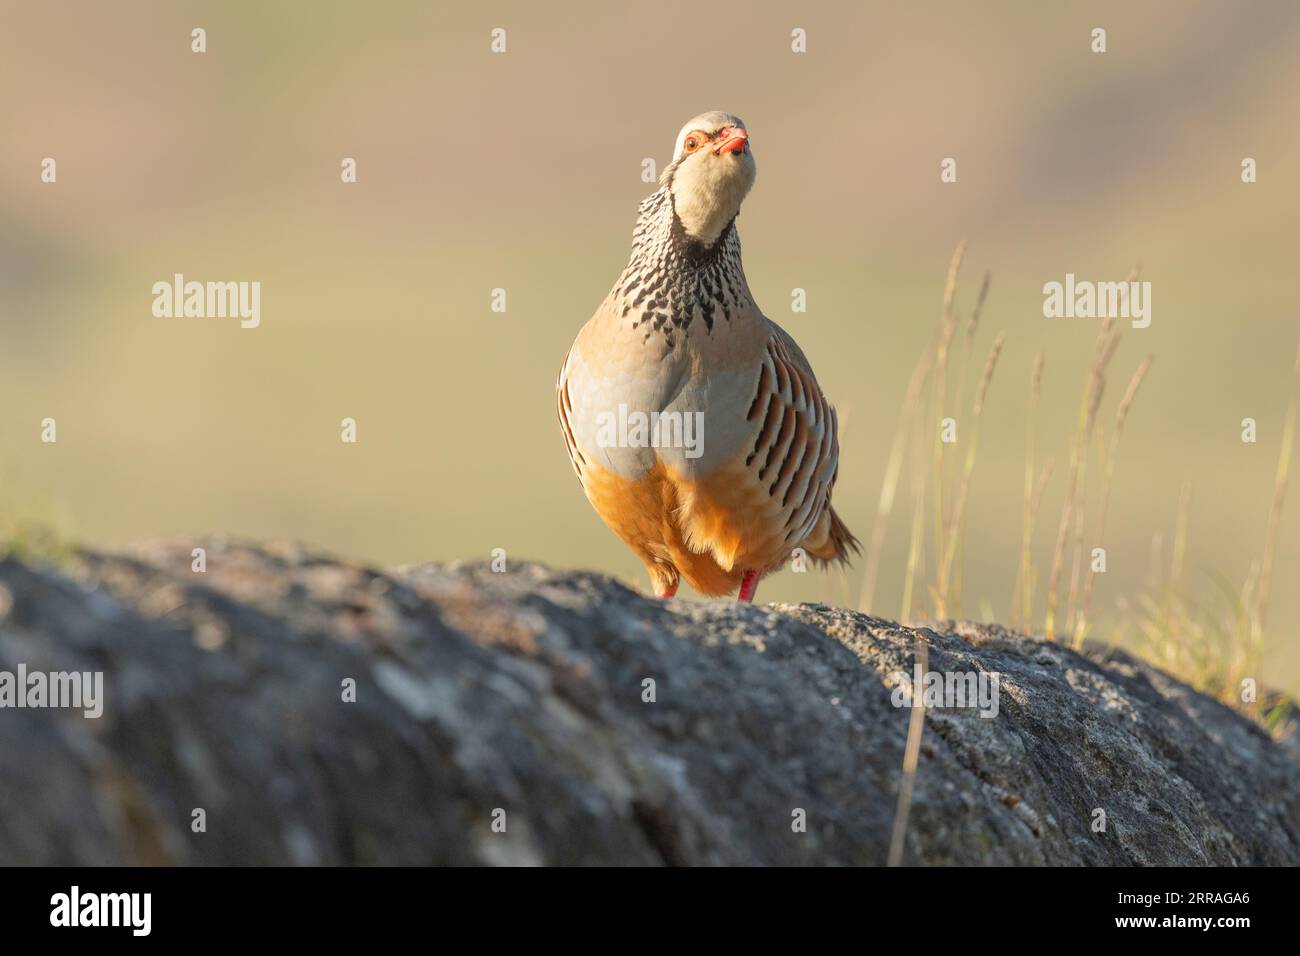 A red-legged partridge (Alectoris rufa) stands on a stone wall. Stock Photo